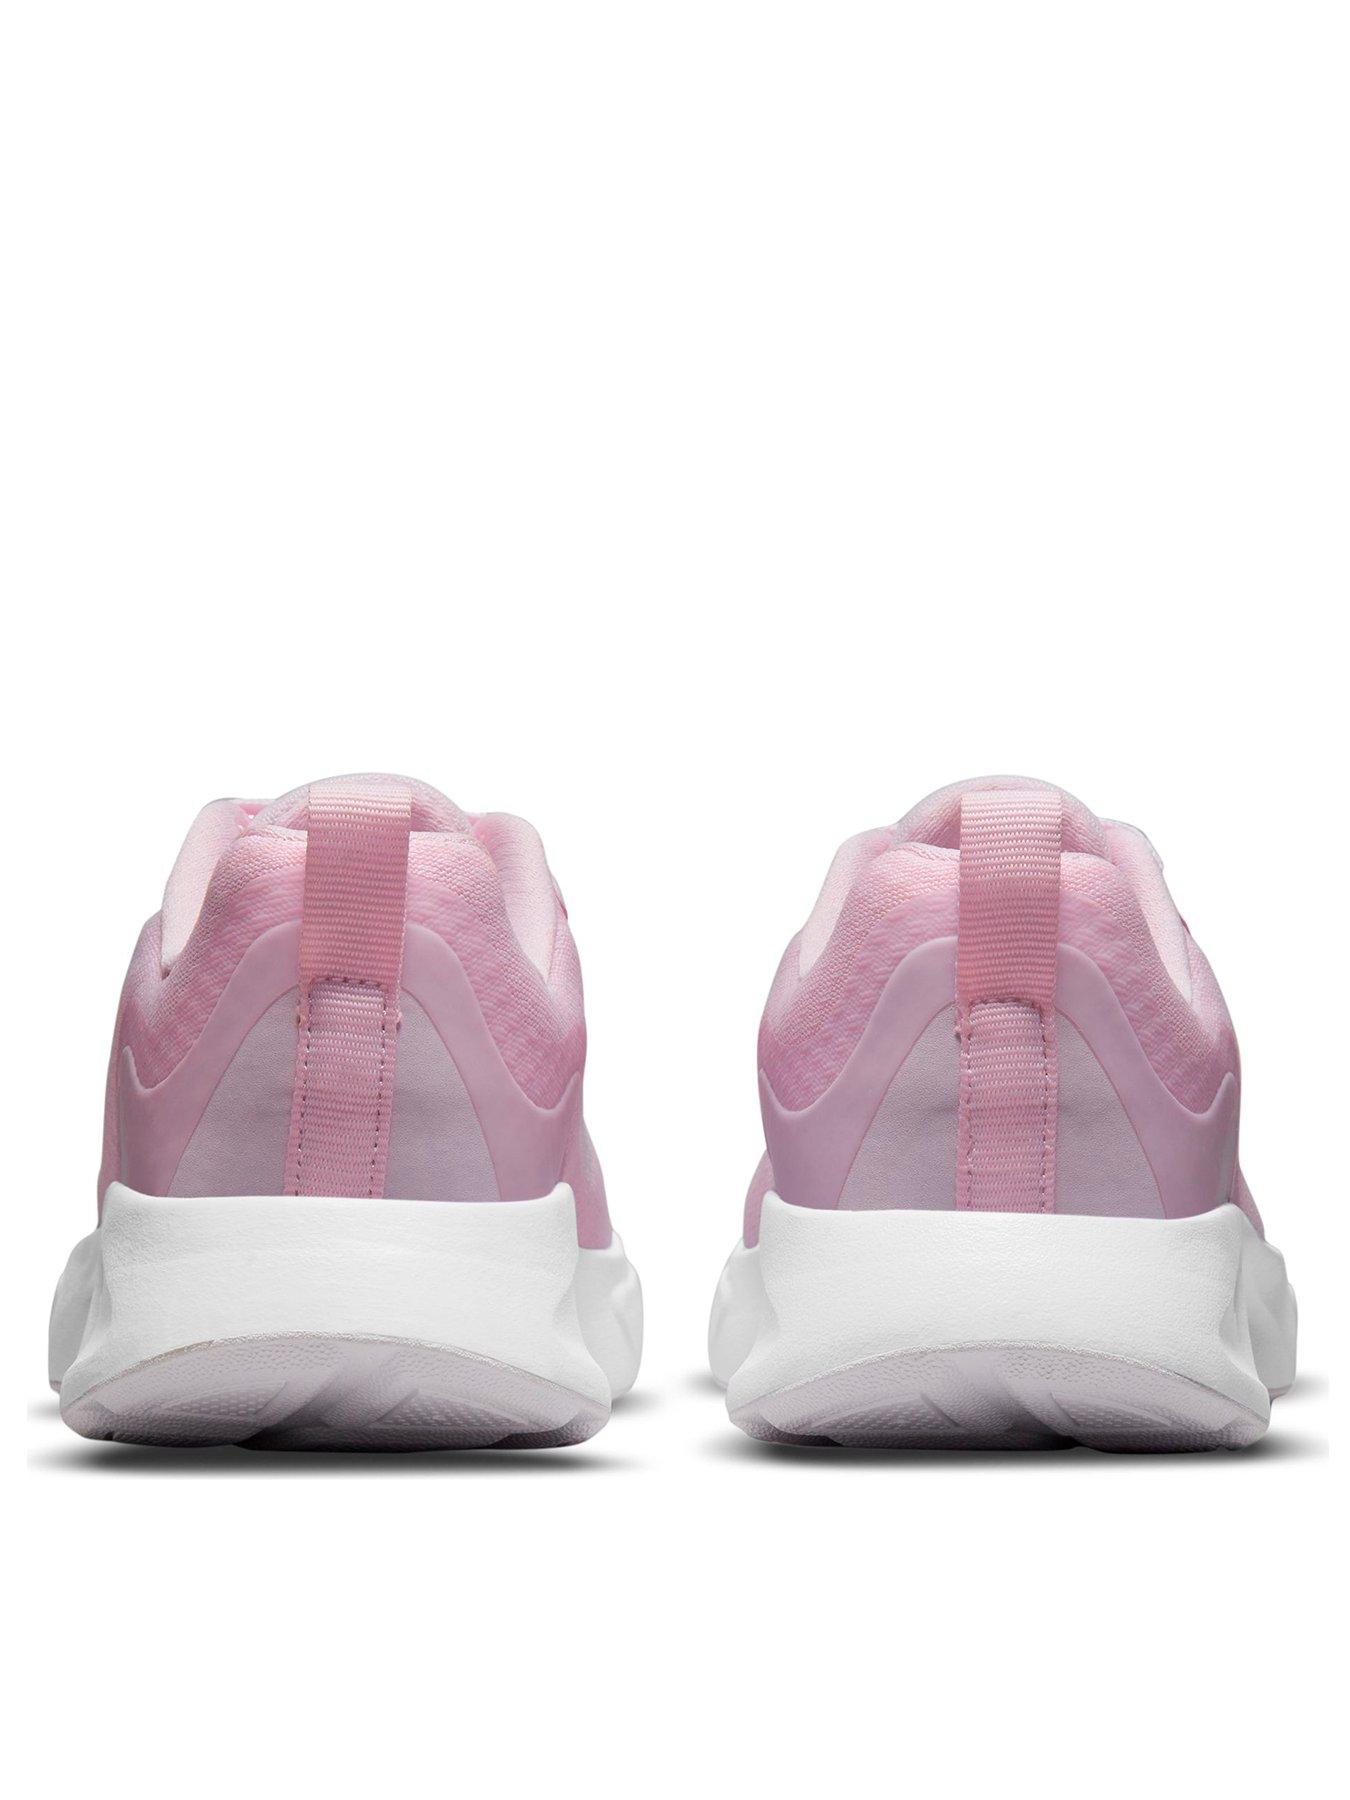 Trainers Wearallday Trainer - Pink/White